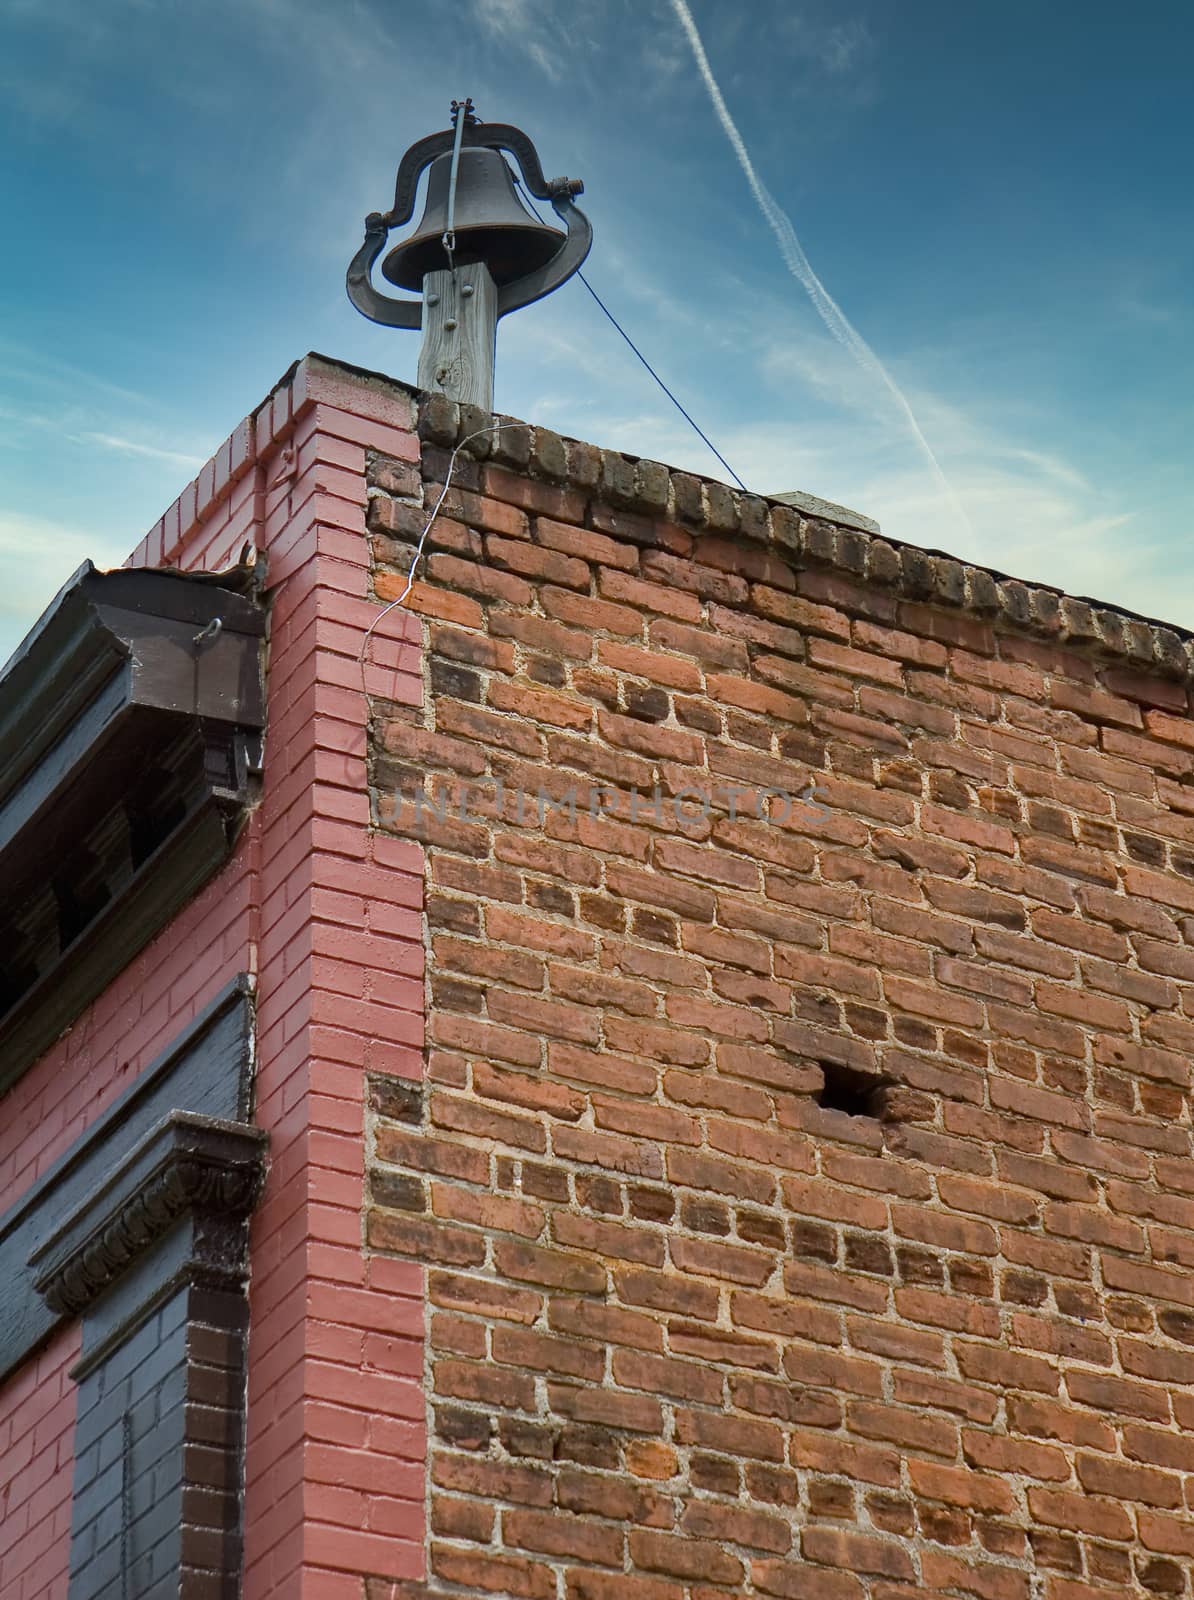 Bell on Old Brick Building by dbvirago